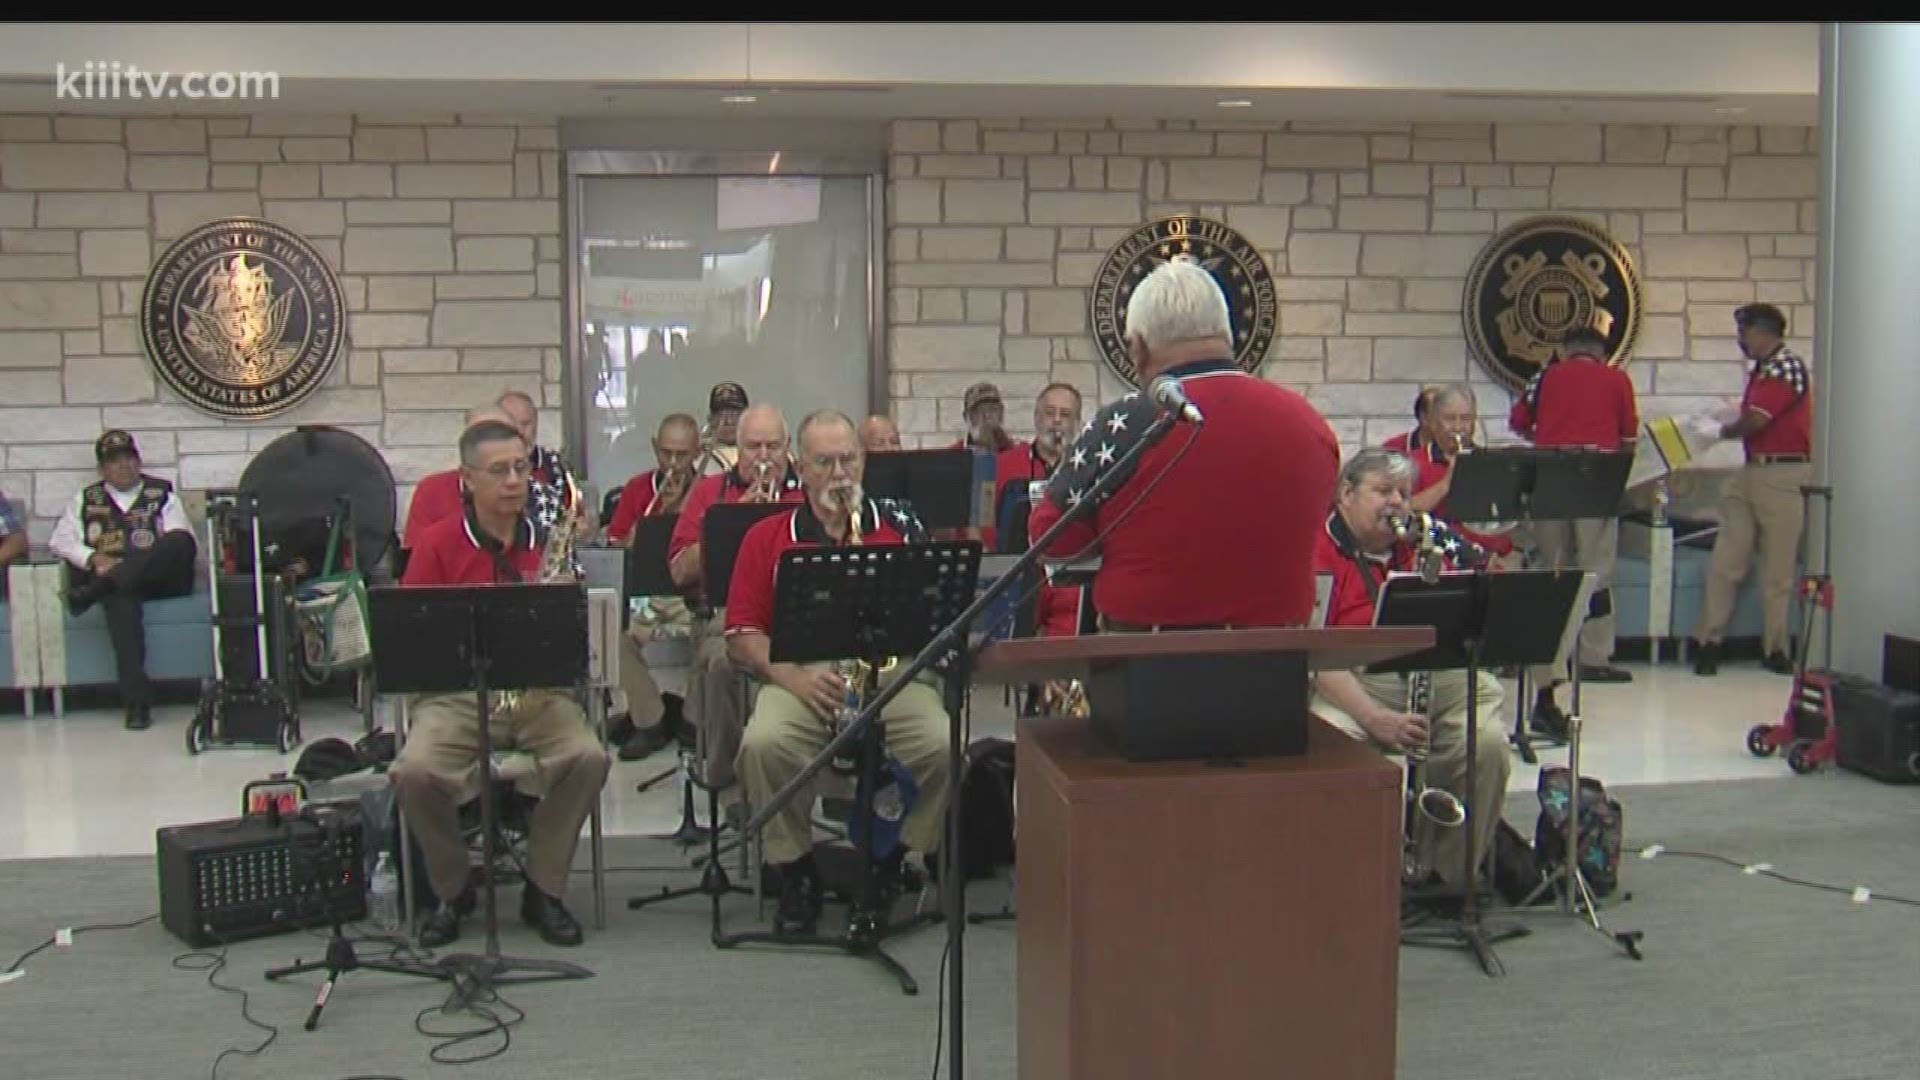 Veterans Day is on Sunday, but on Thursday the Valley Coastal Bend Health Care System hosted their annual Veterans Day celebration.